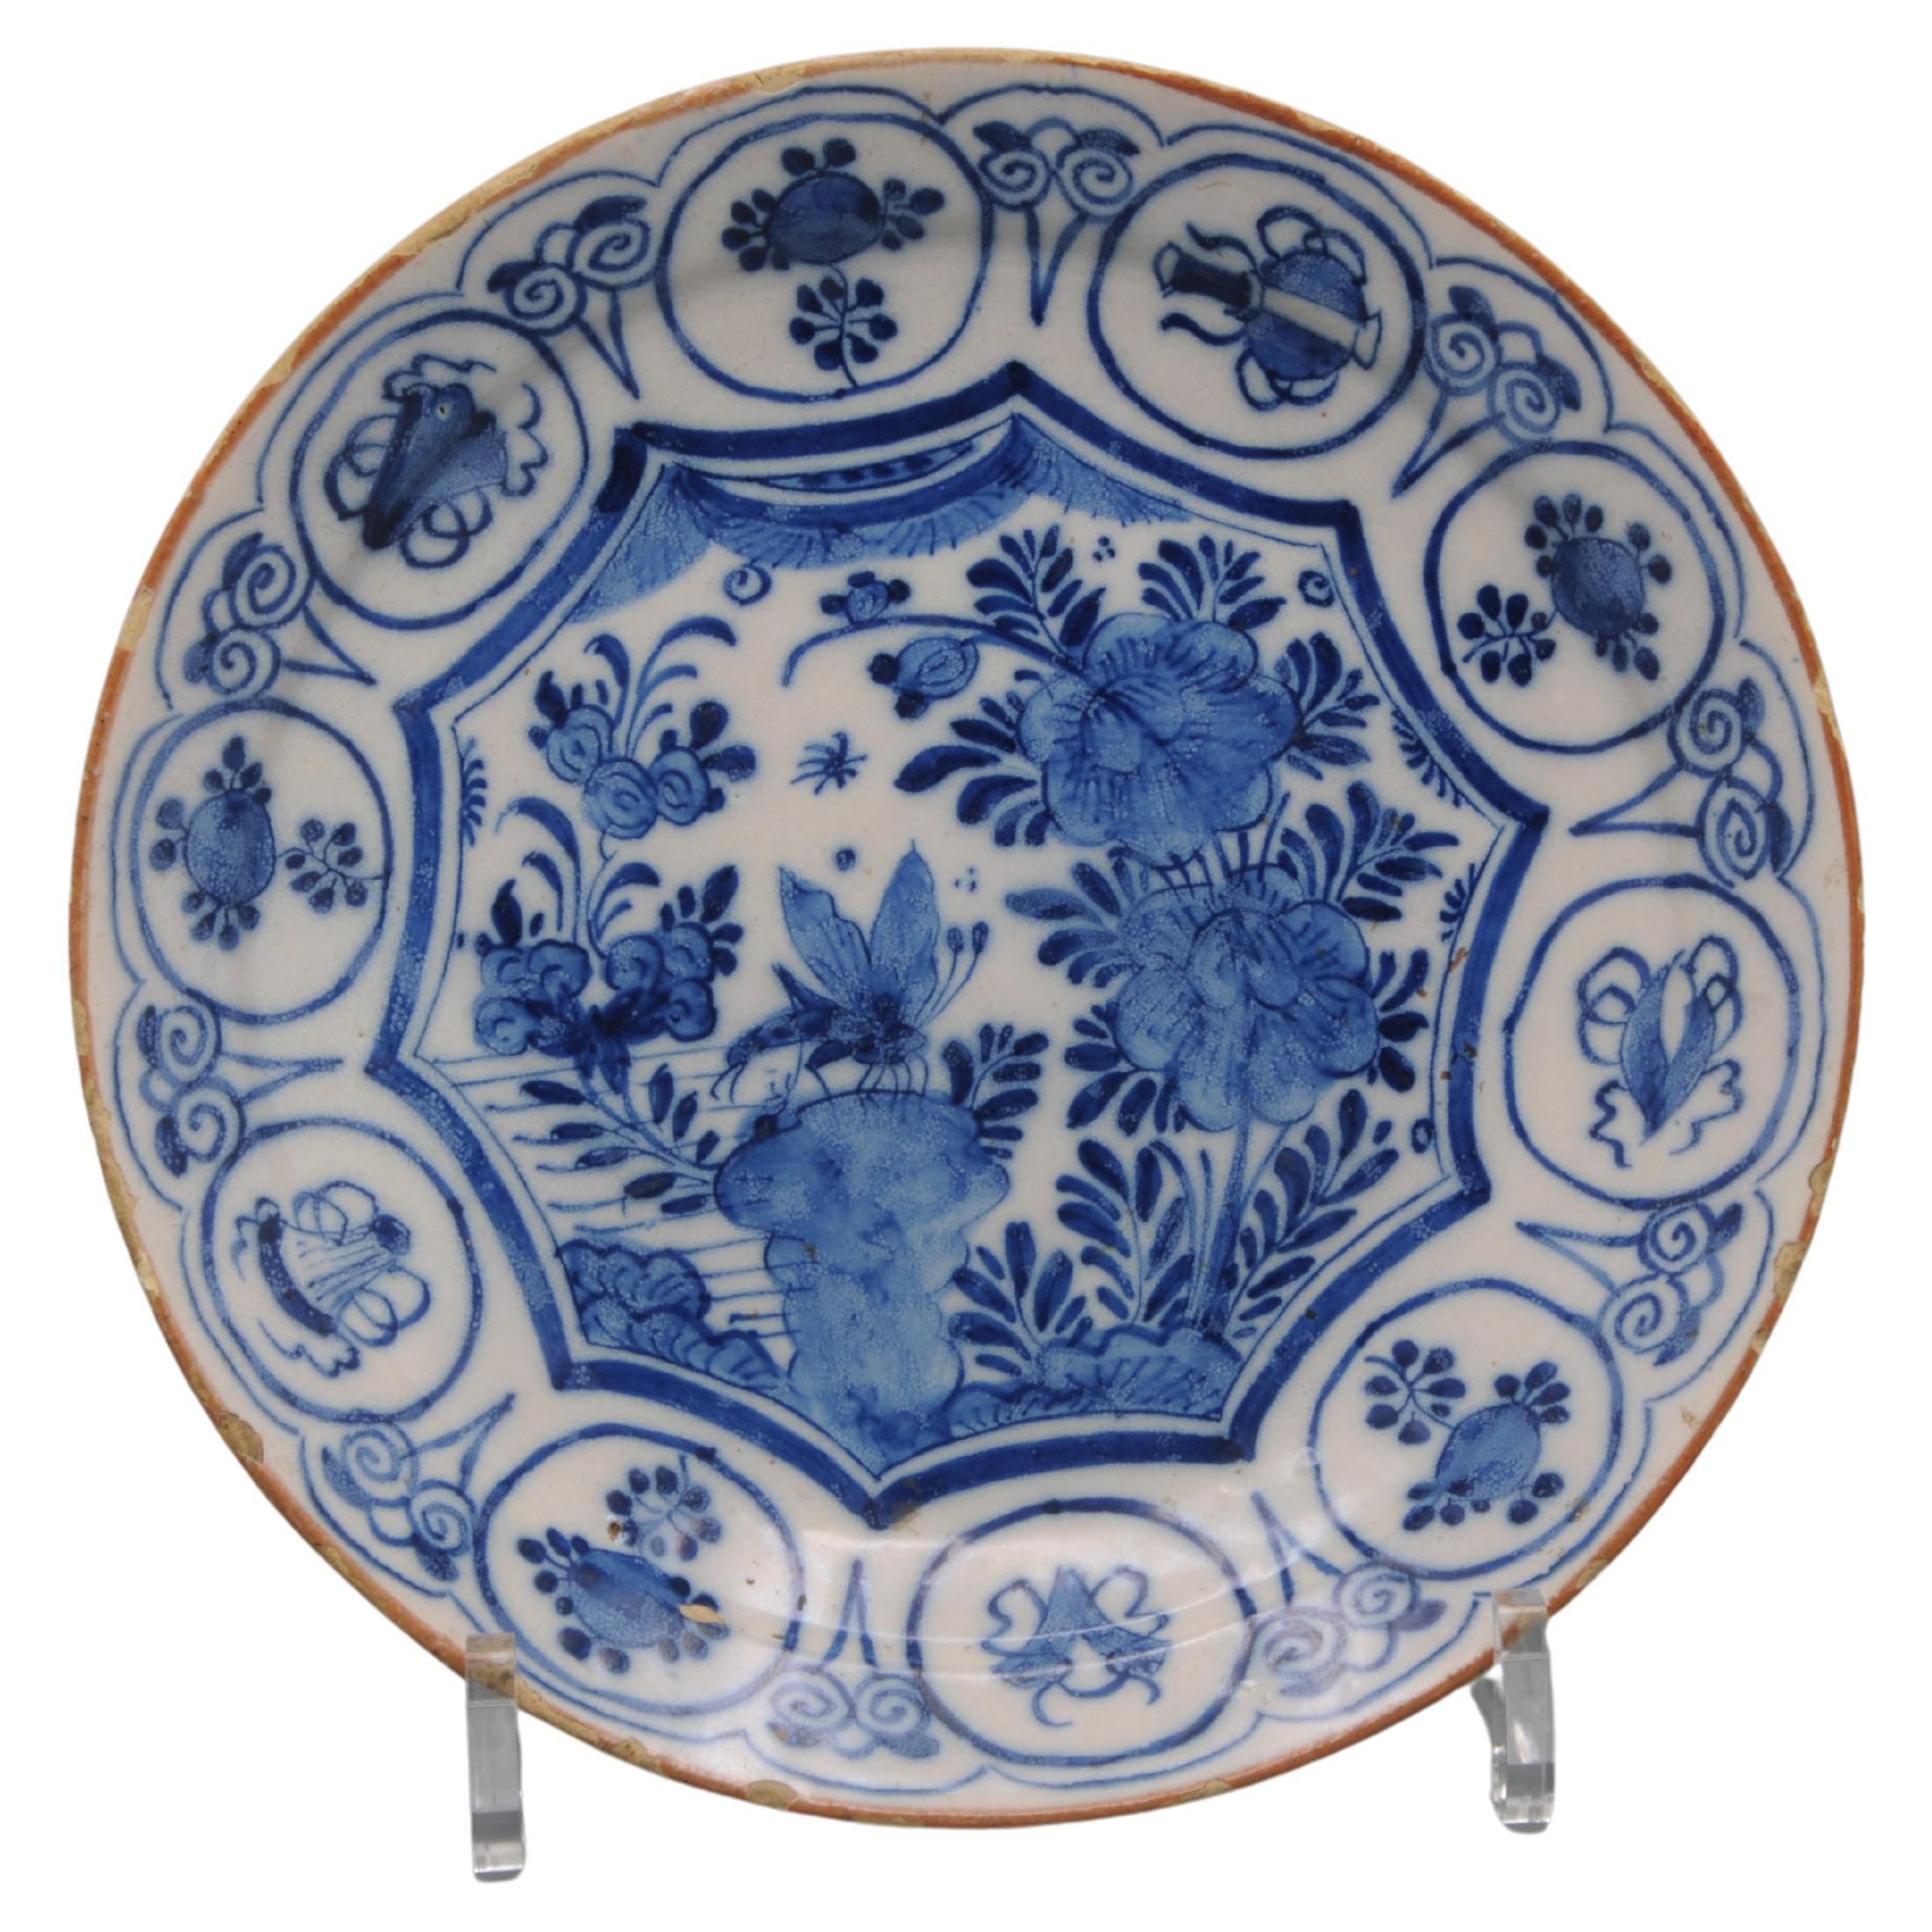 Delft "De Witte Starre" - 18th century Dragonfly Plate For Sale